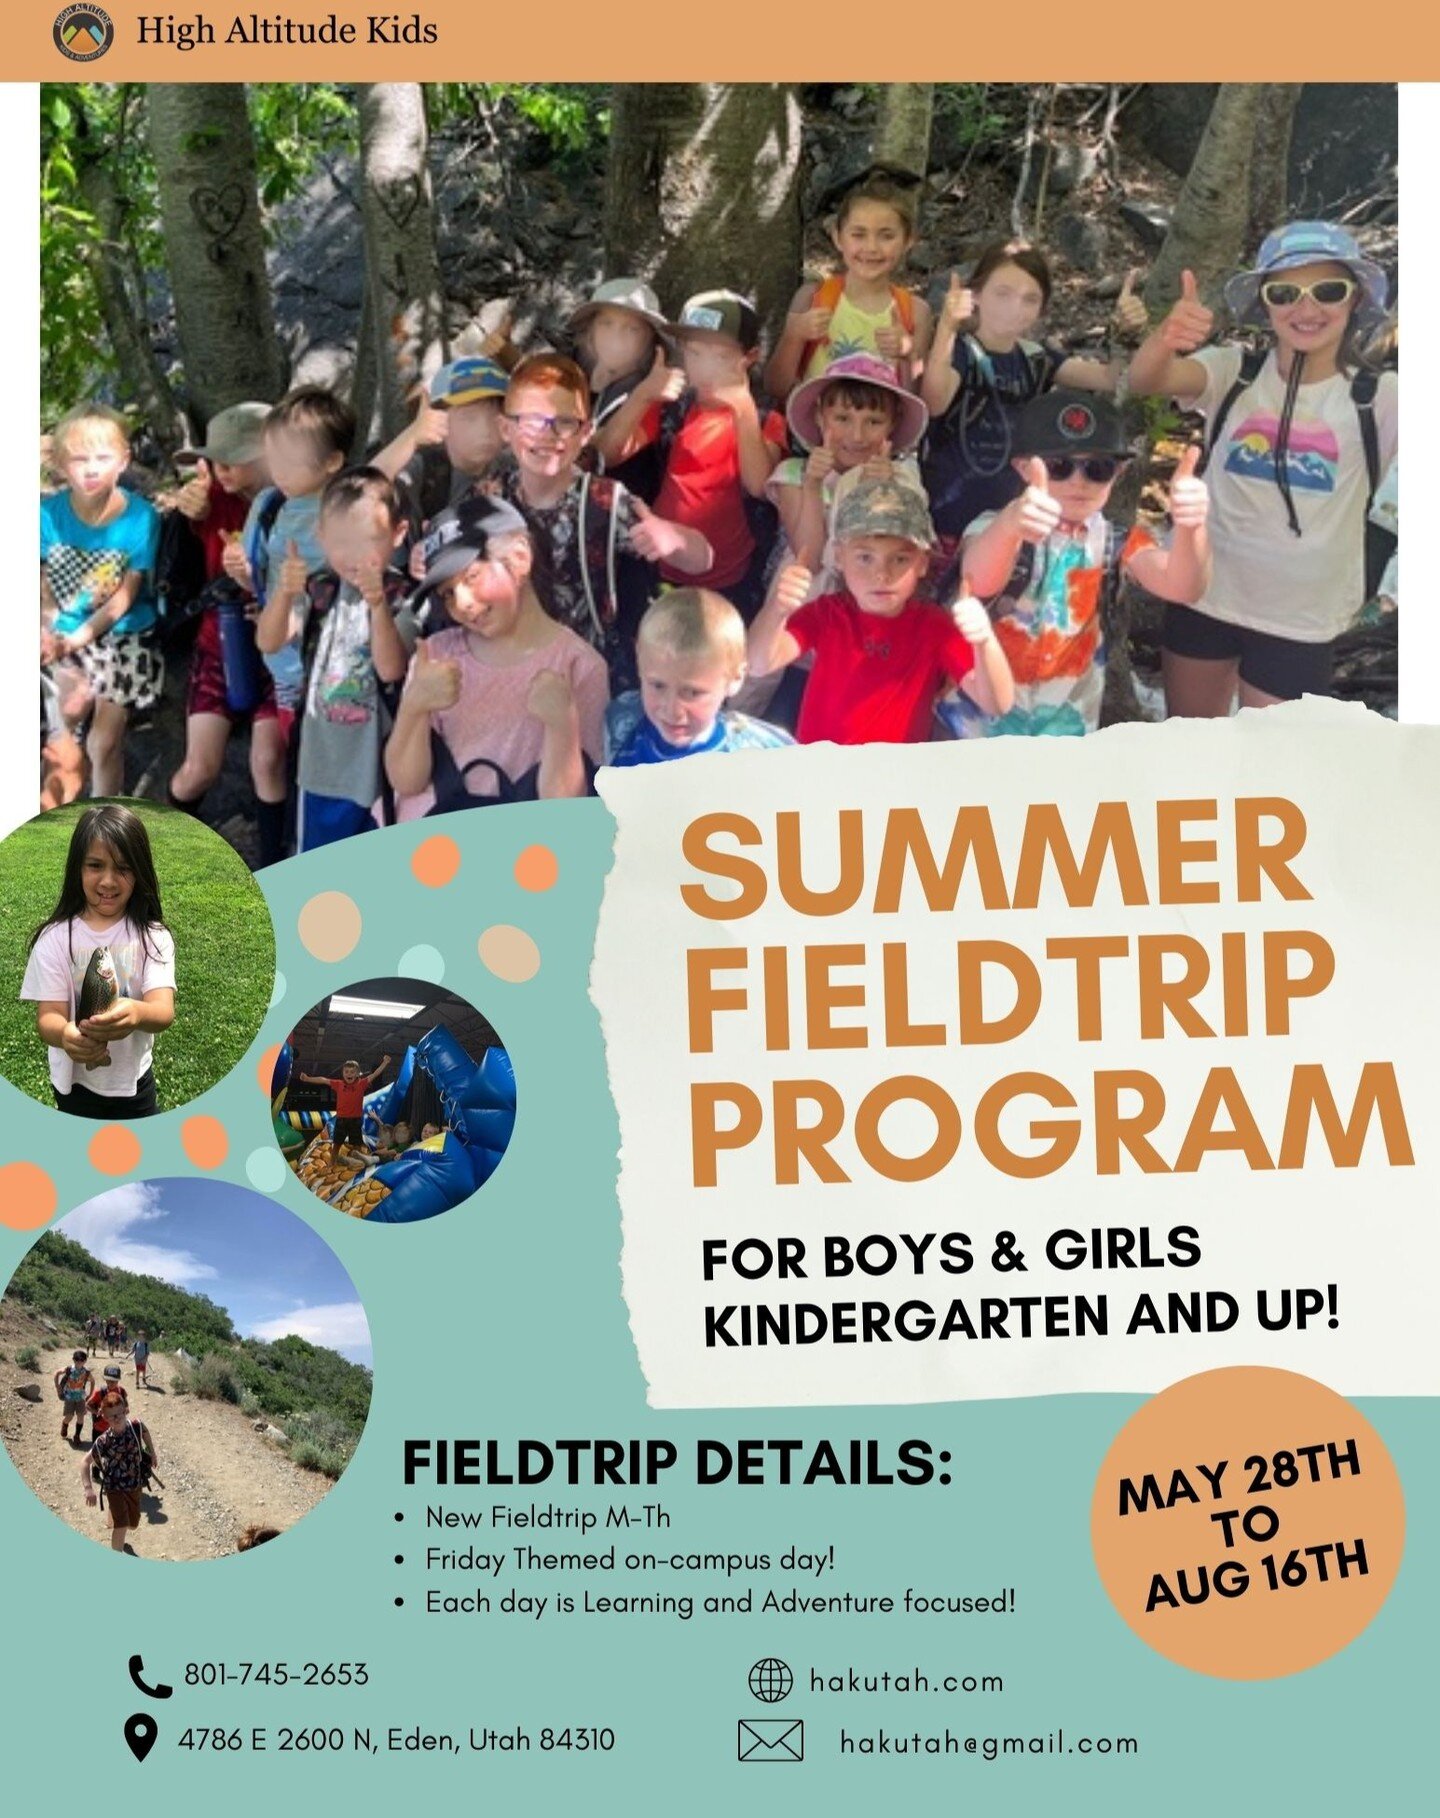 High Altitude Kids keeps your children busy learning and exploring all summer long!

HAK's Summer Fieldtrip Program is a truly amazing program that has new fieldtrips M-Th with a themed on-campus day every Friday! 

You can sign your child up for 1-5